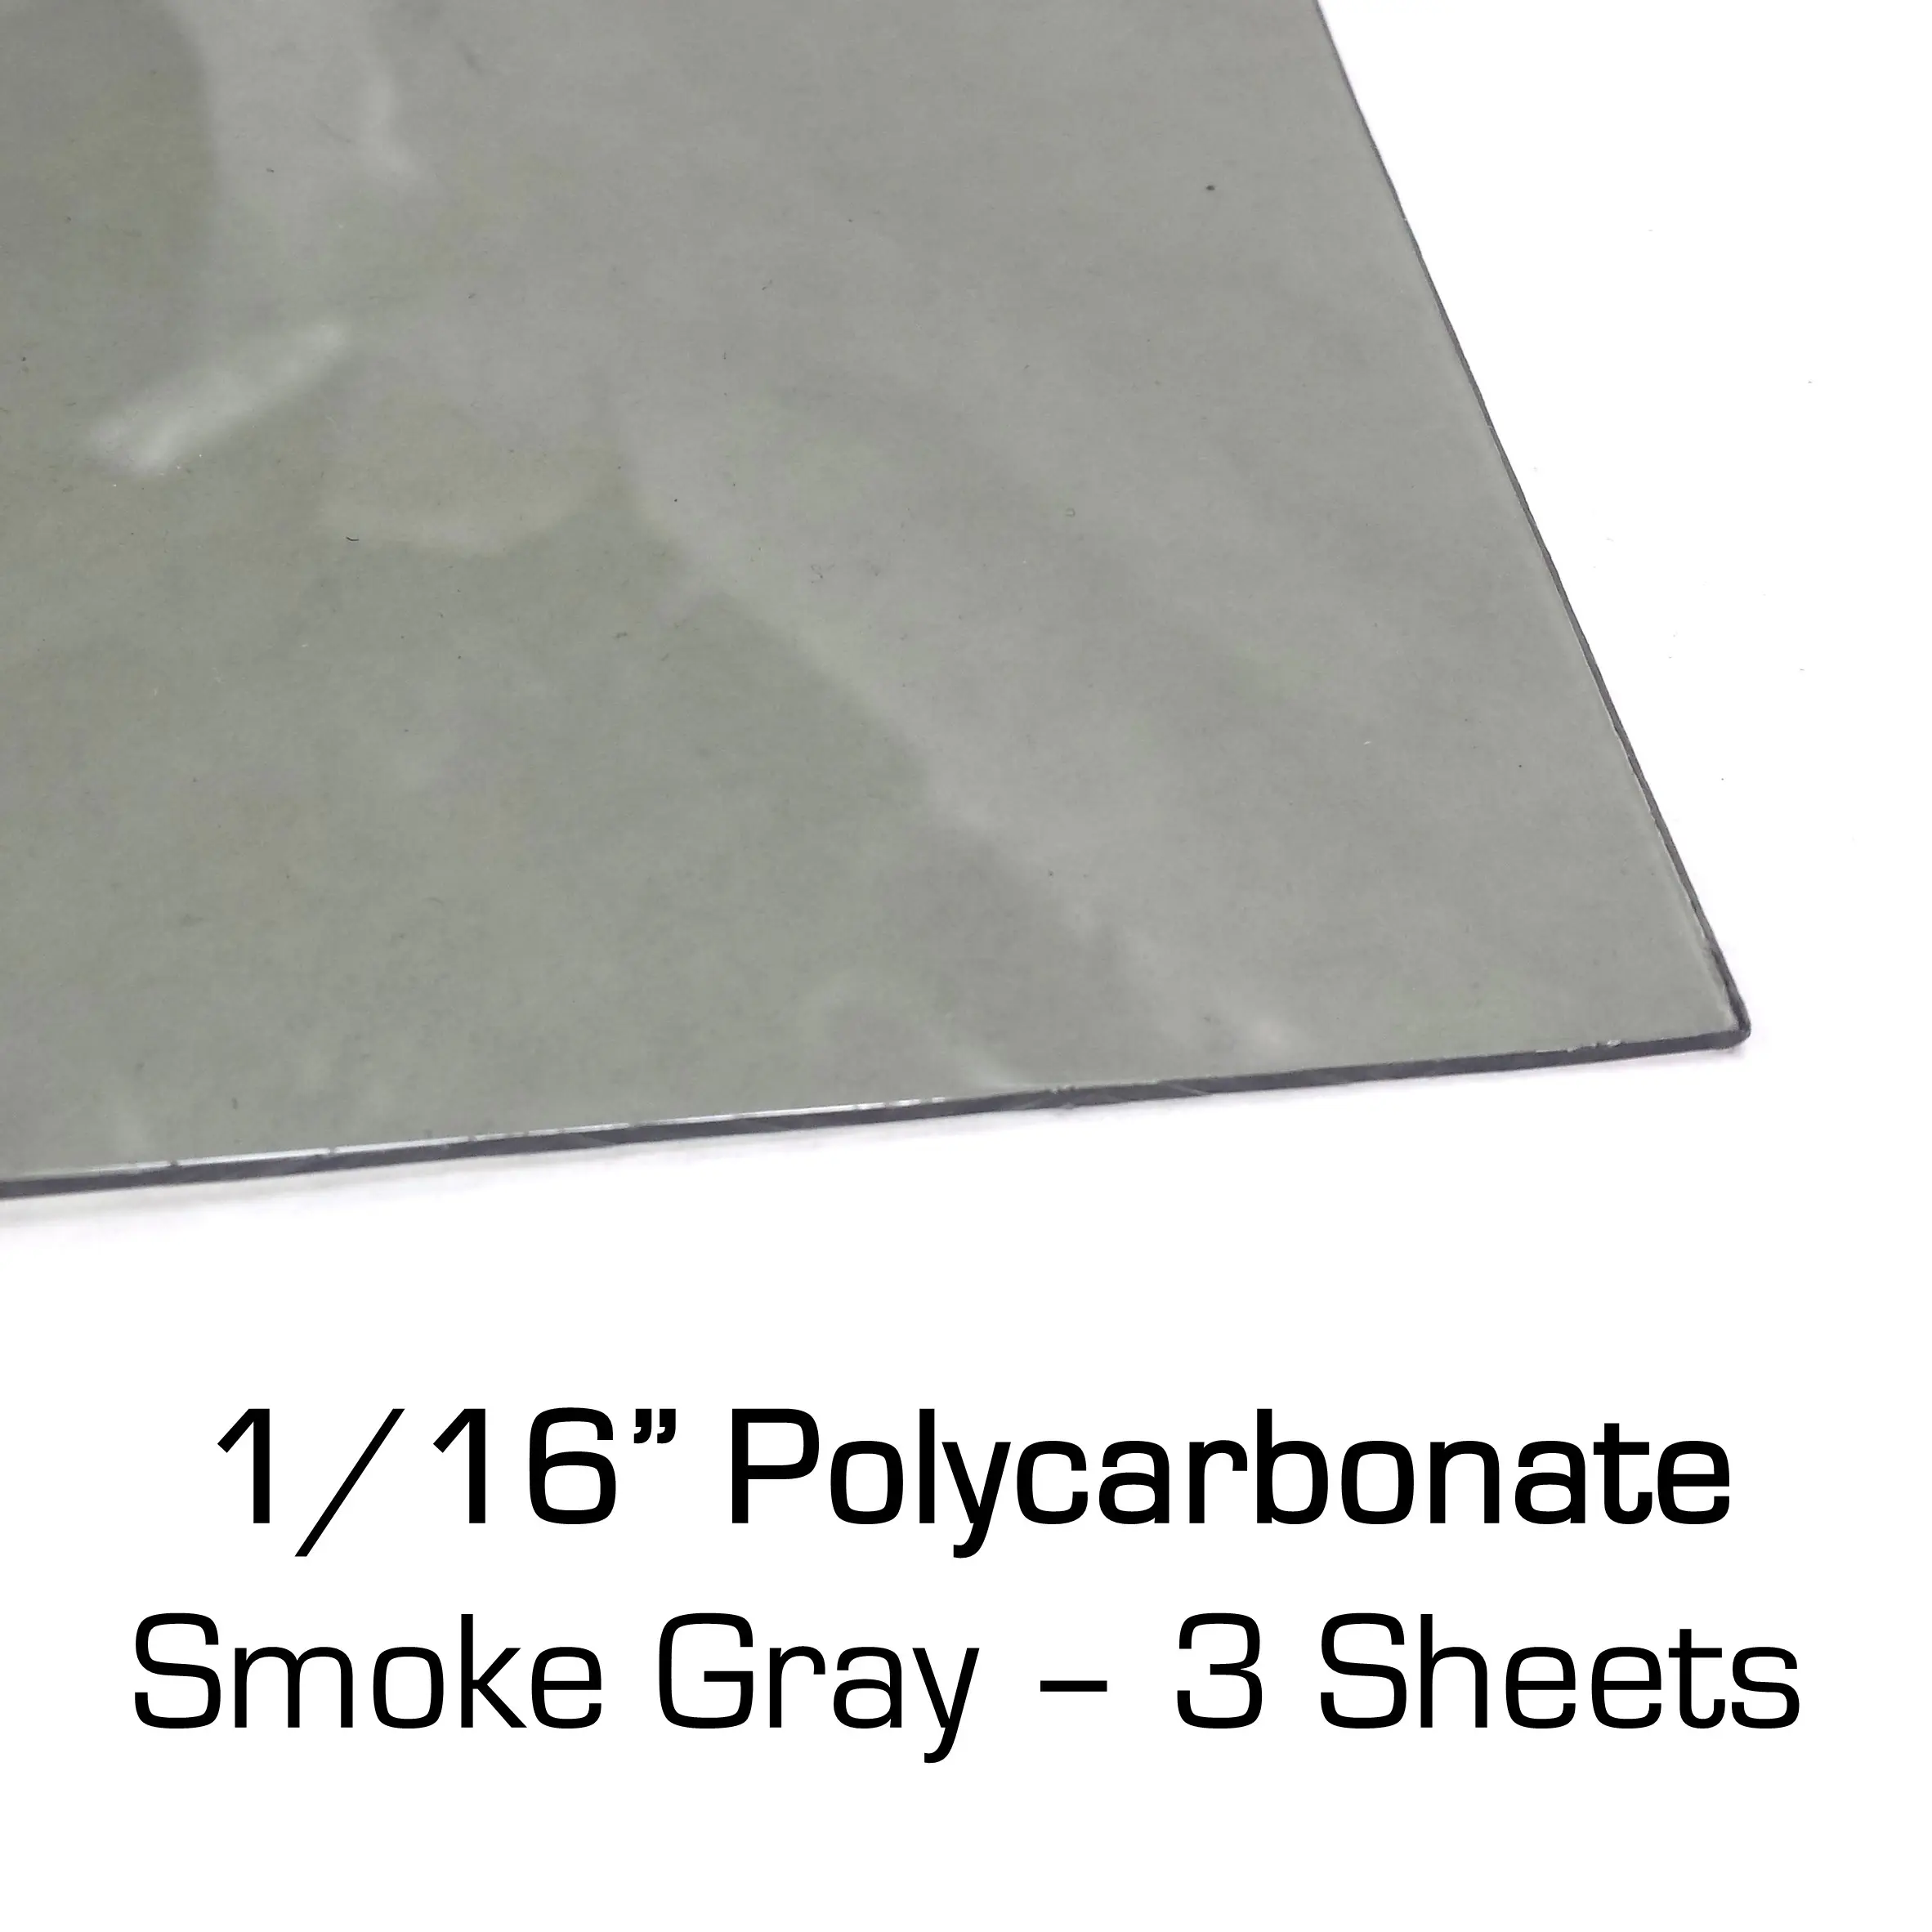 smoked lexan sheet - What are the disadvantages of Lexan